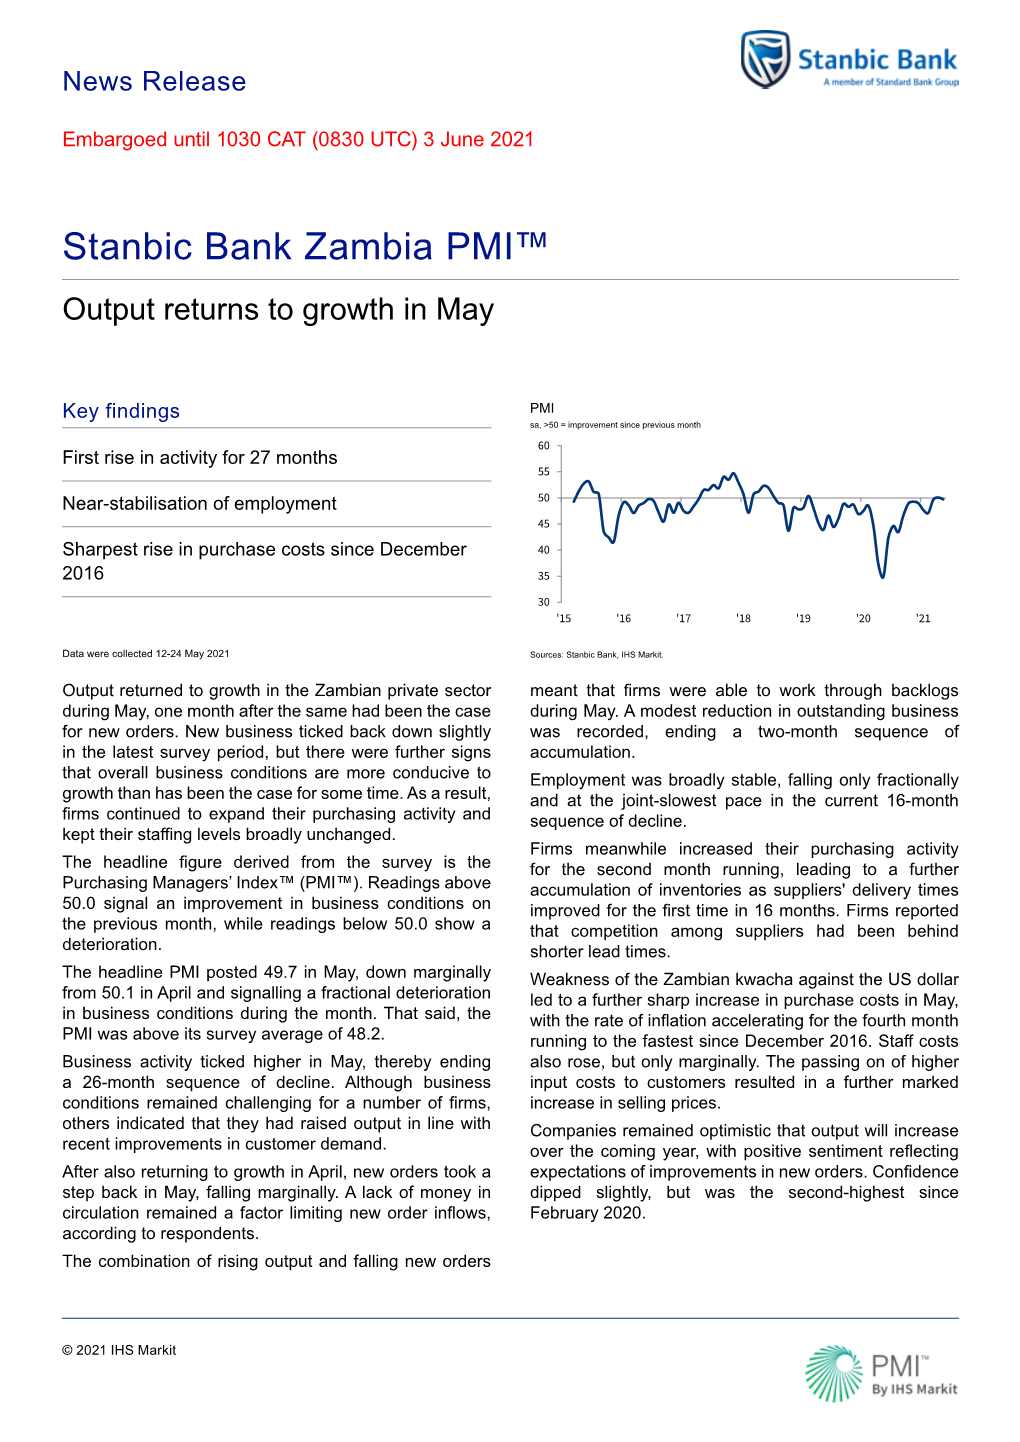 Stanbic Bank Zambia PMI™ Output Returns to Growth in May